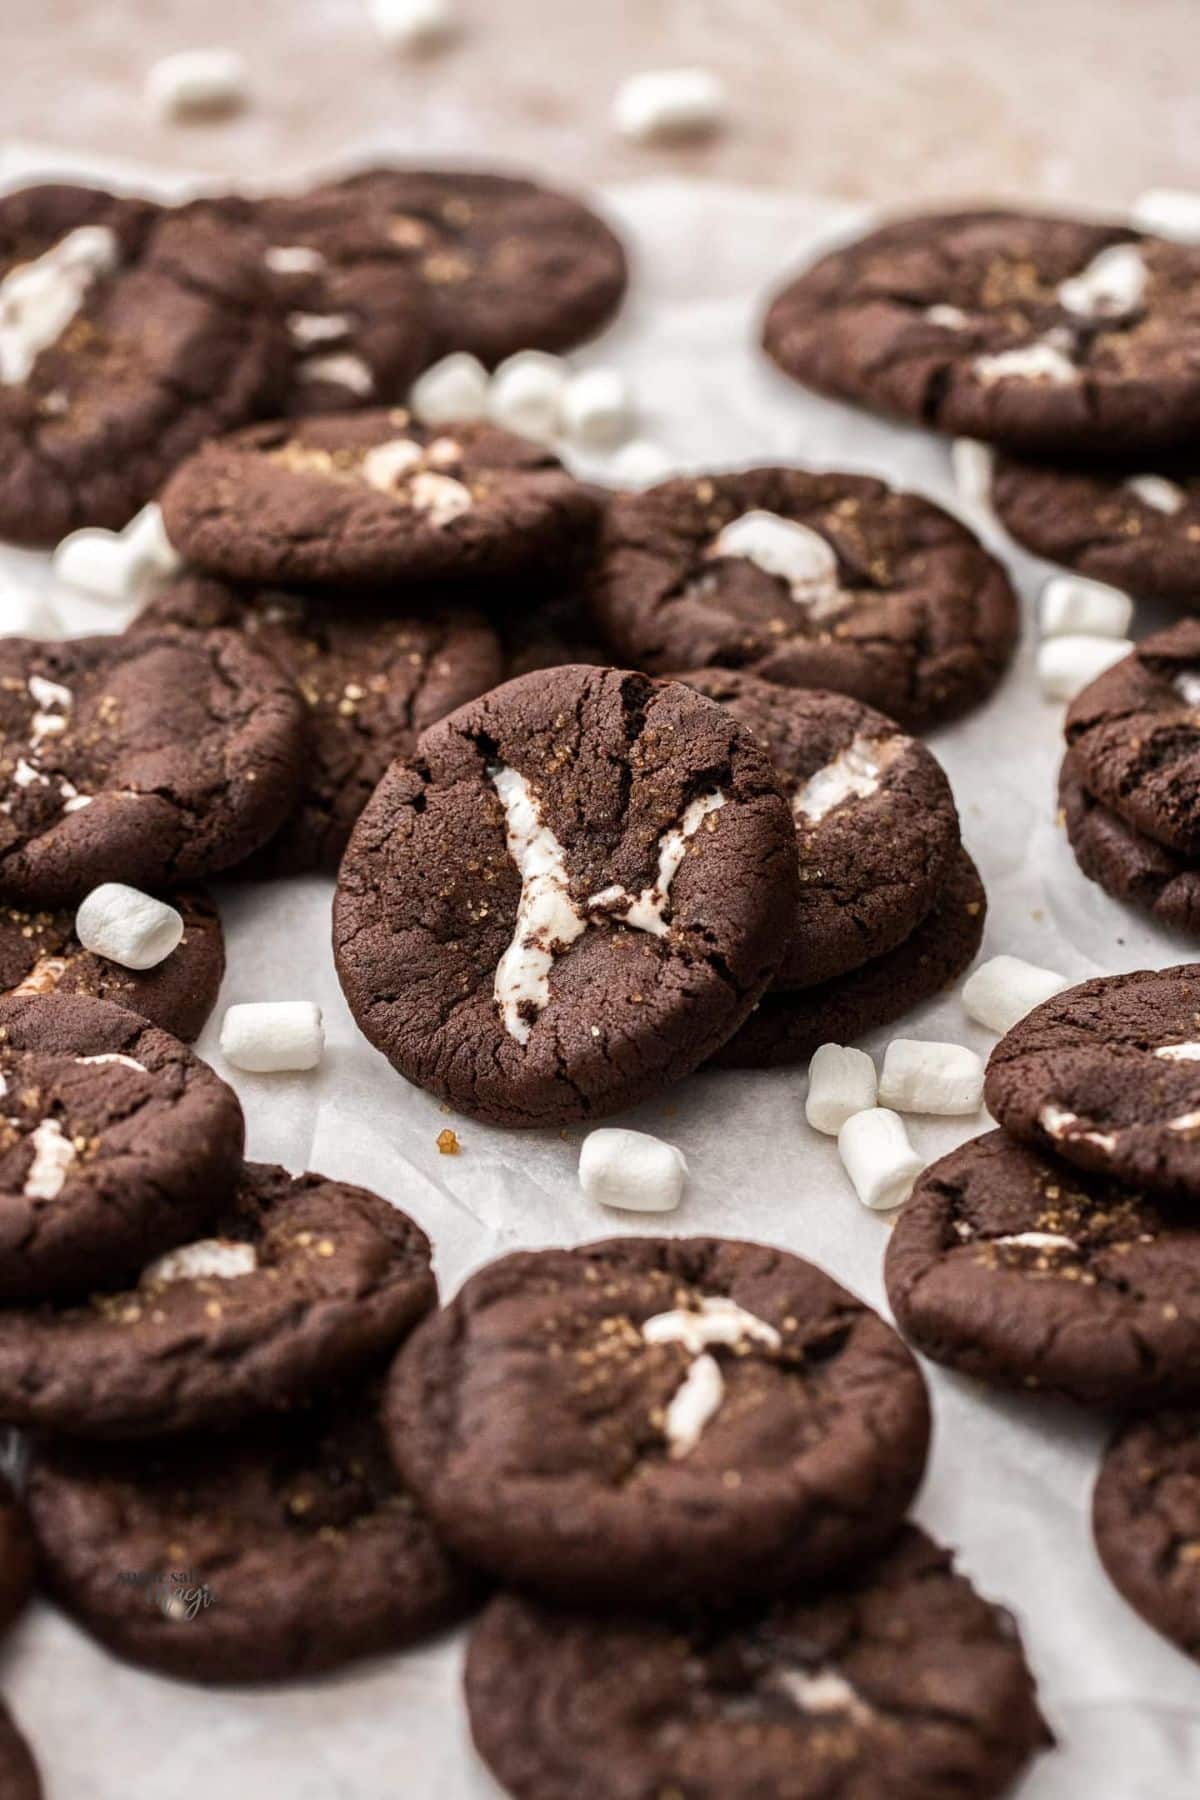 Scrumptious chocolate marshmallow cookies on a table.